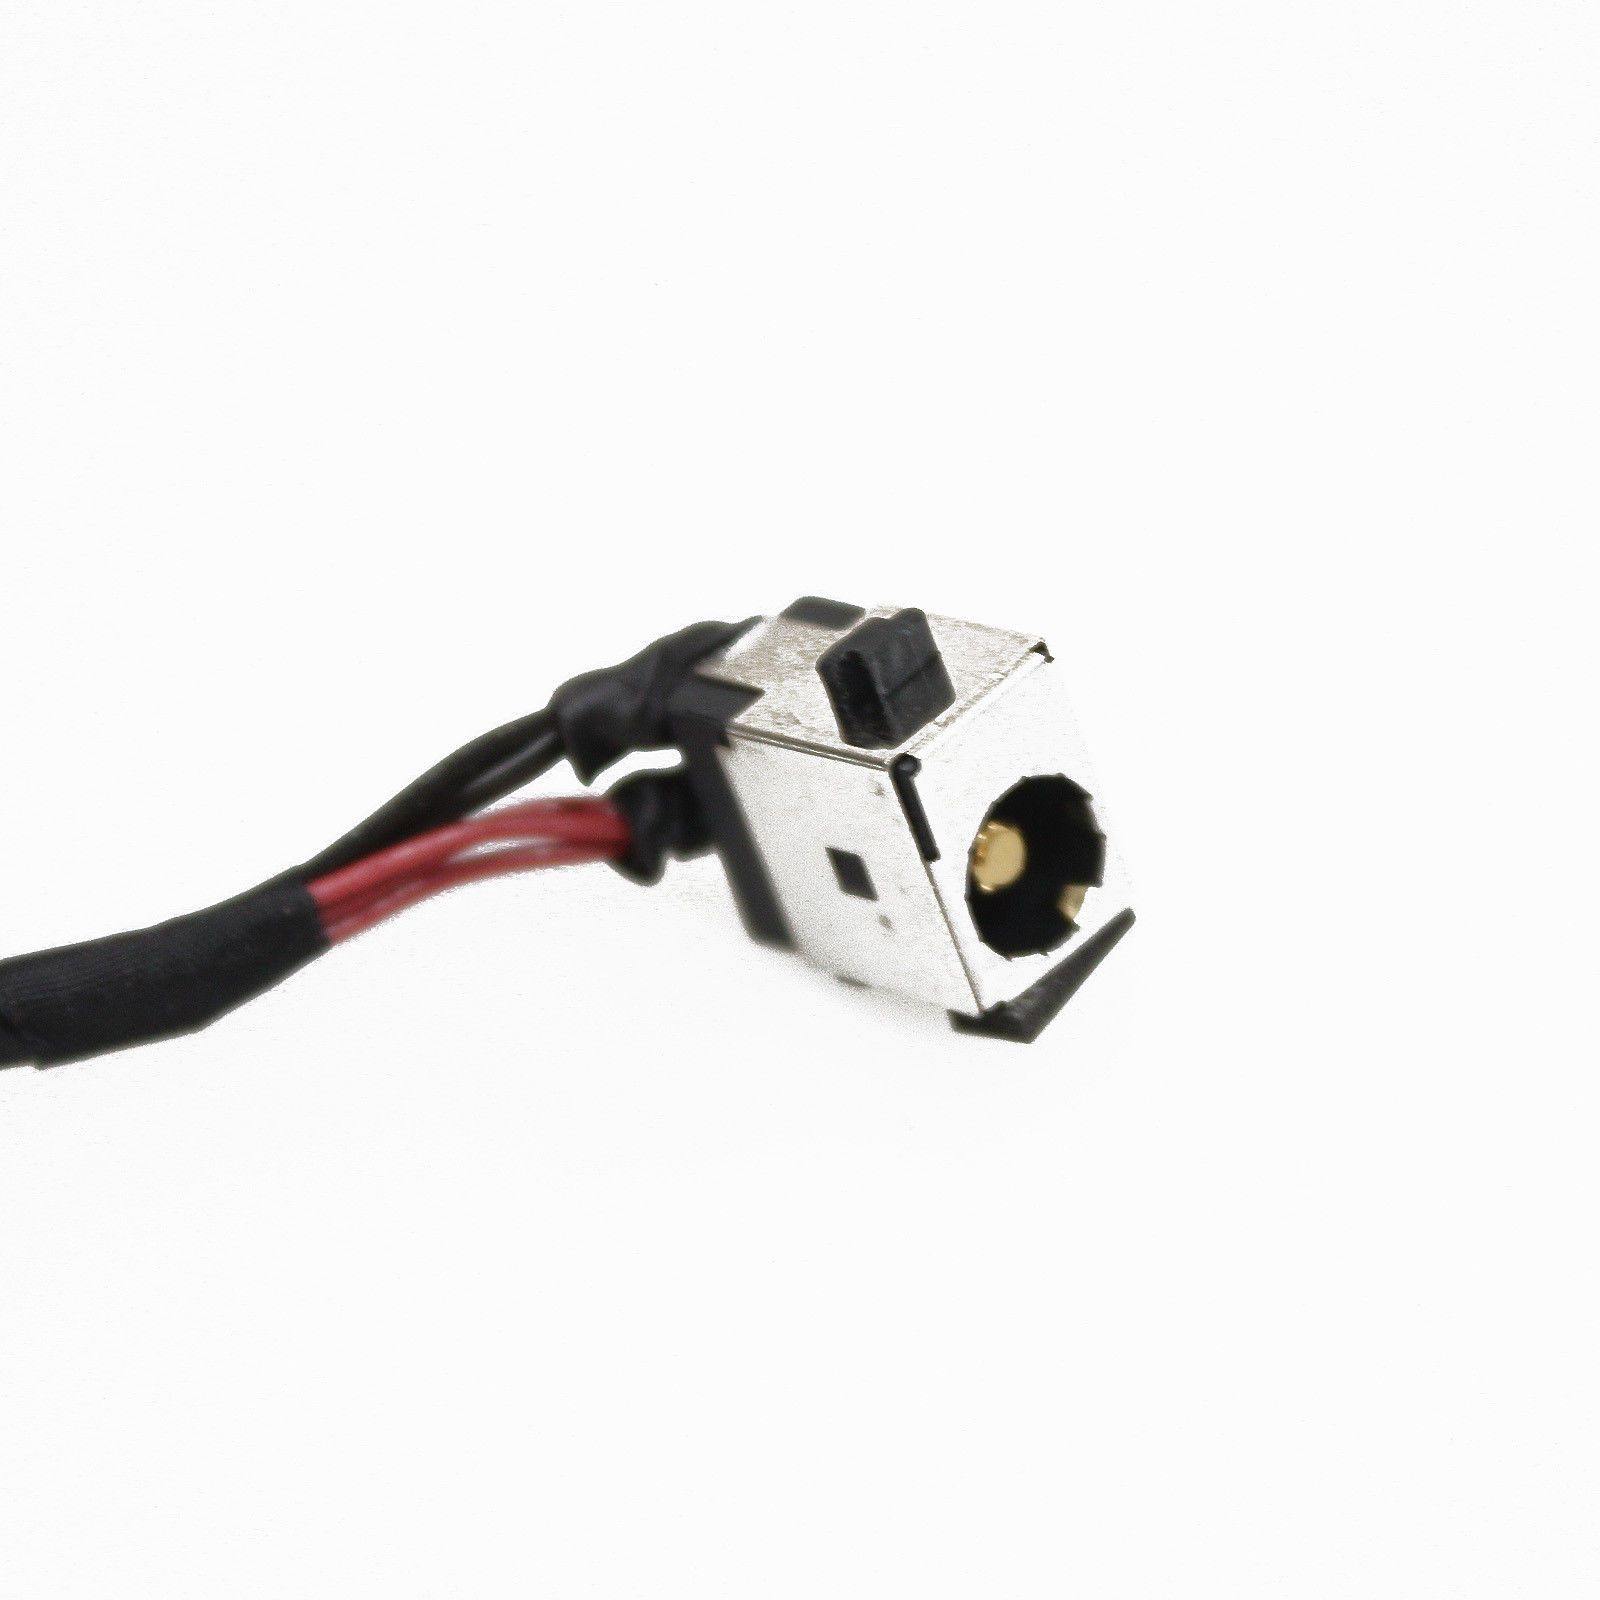 New Asus A750JA A750JB A750JN A750LA A750LB A750LN 4 Pin DC Jack Cable 14004-01800000